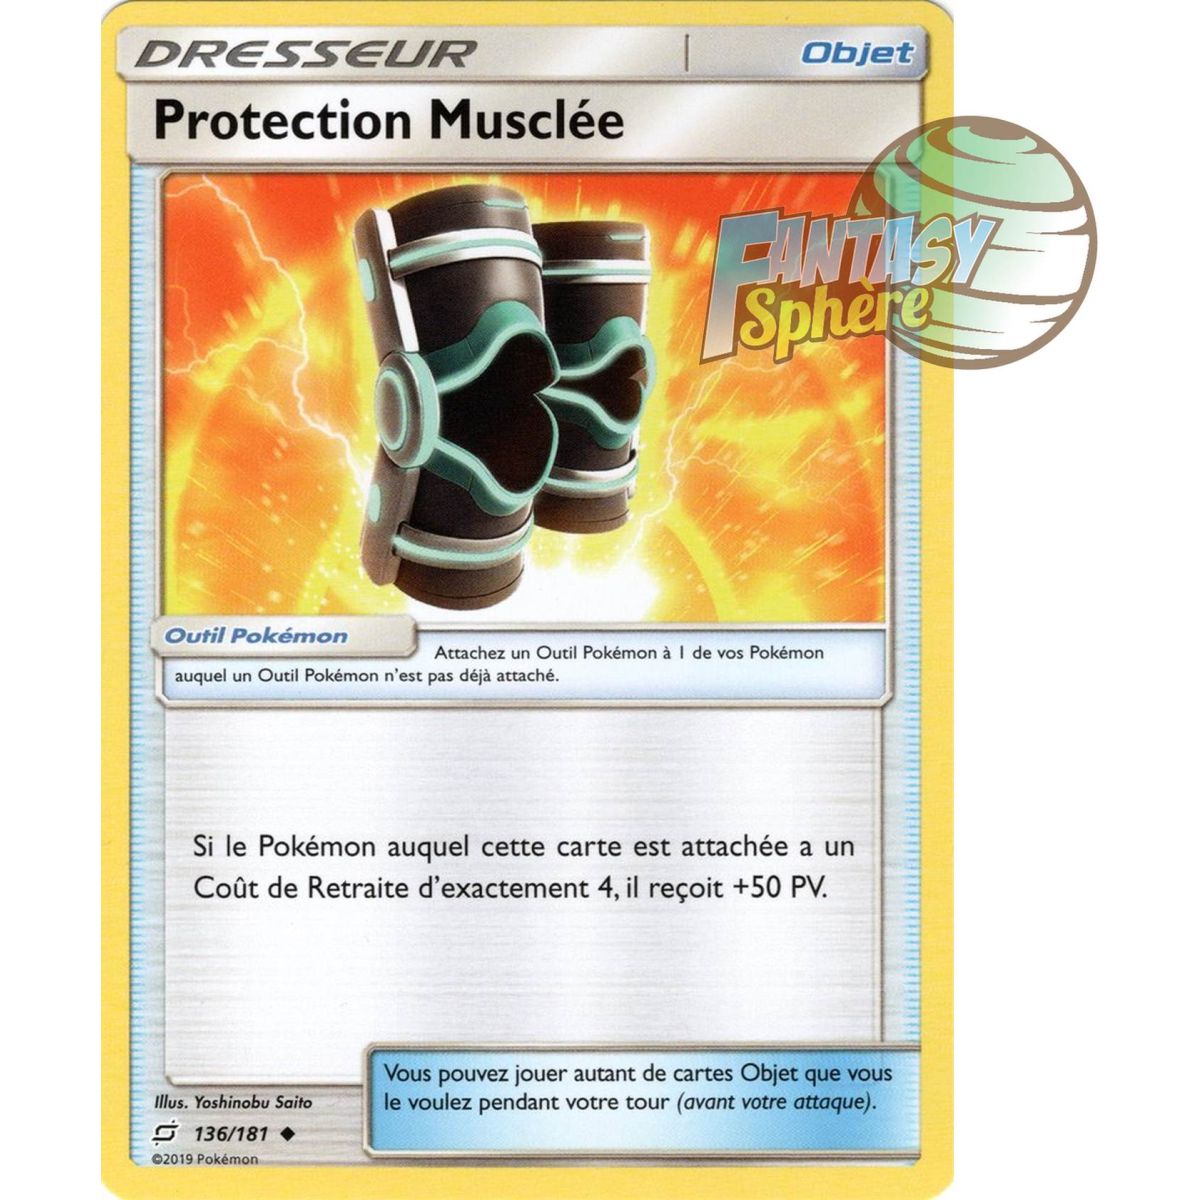 Muscular Protection - Uncommon 136/181 - Sun and Moon 9 Shock Duo